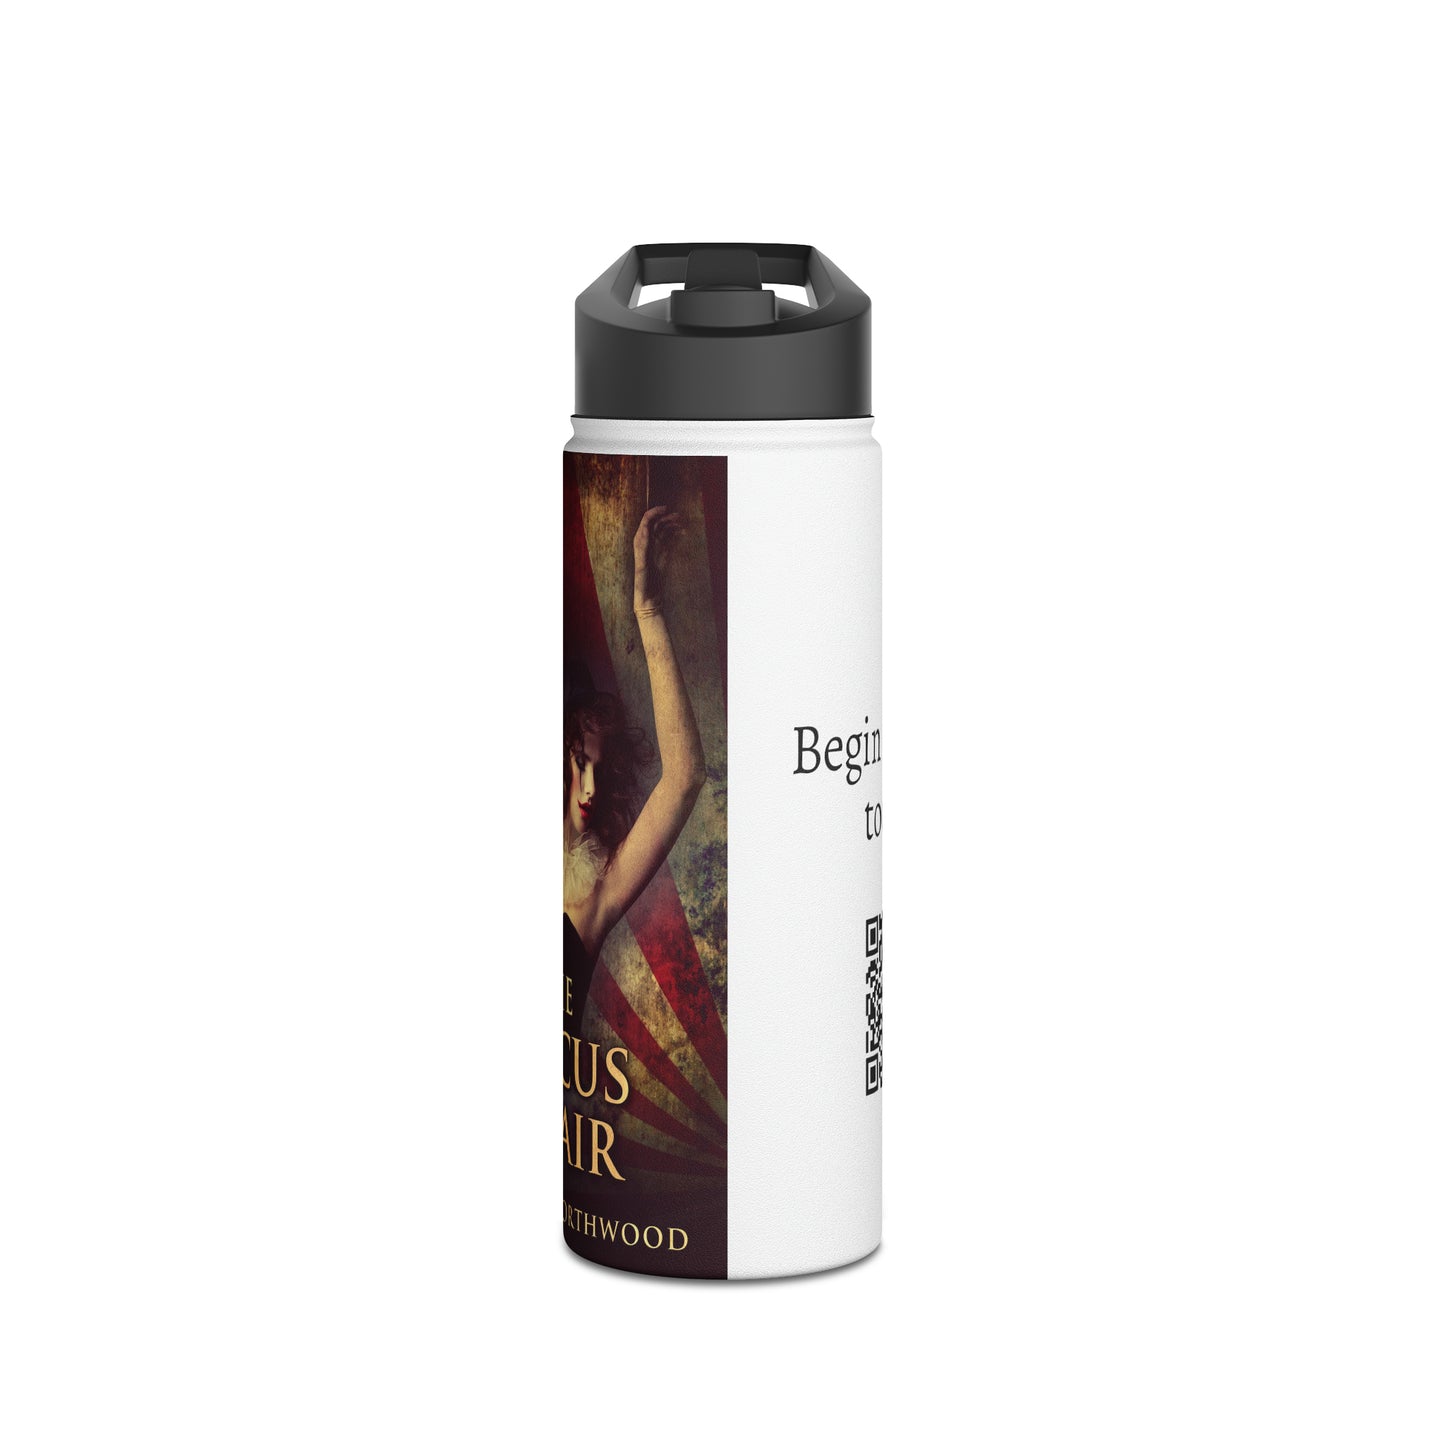 The Circus Affair - Stainless Steel Water Bottle